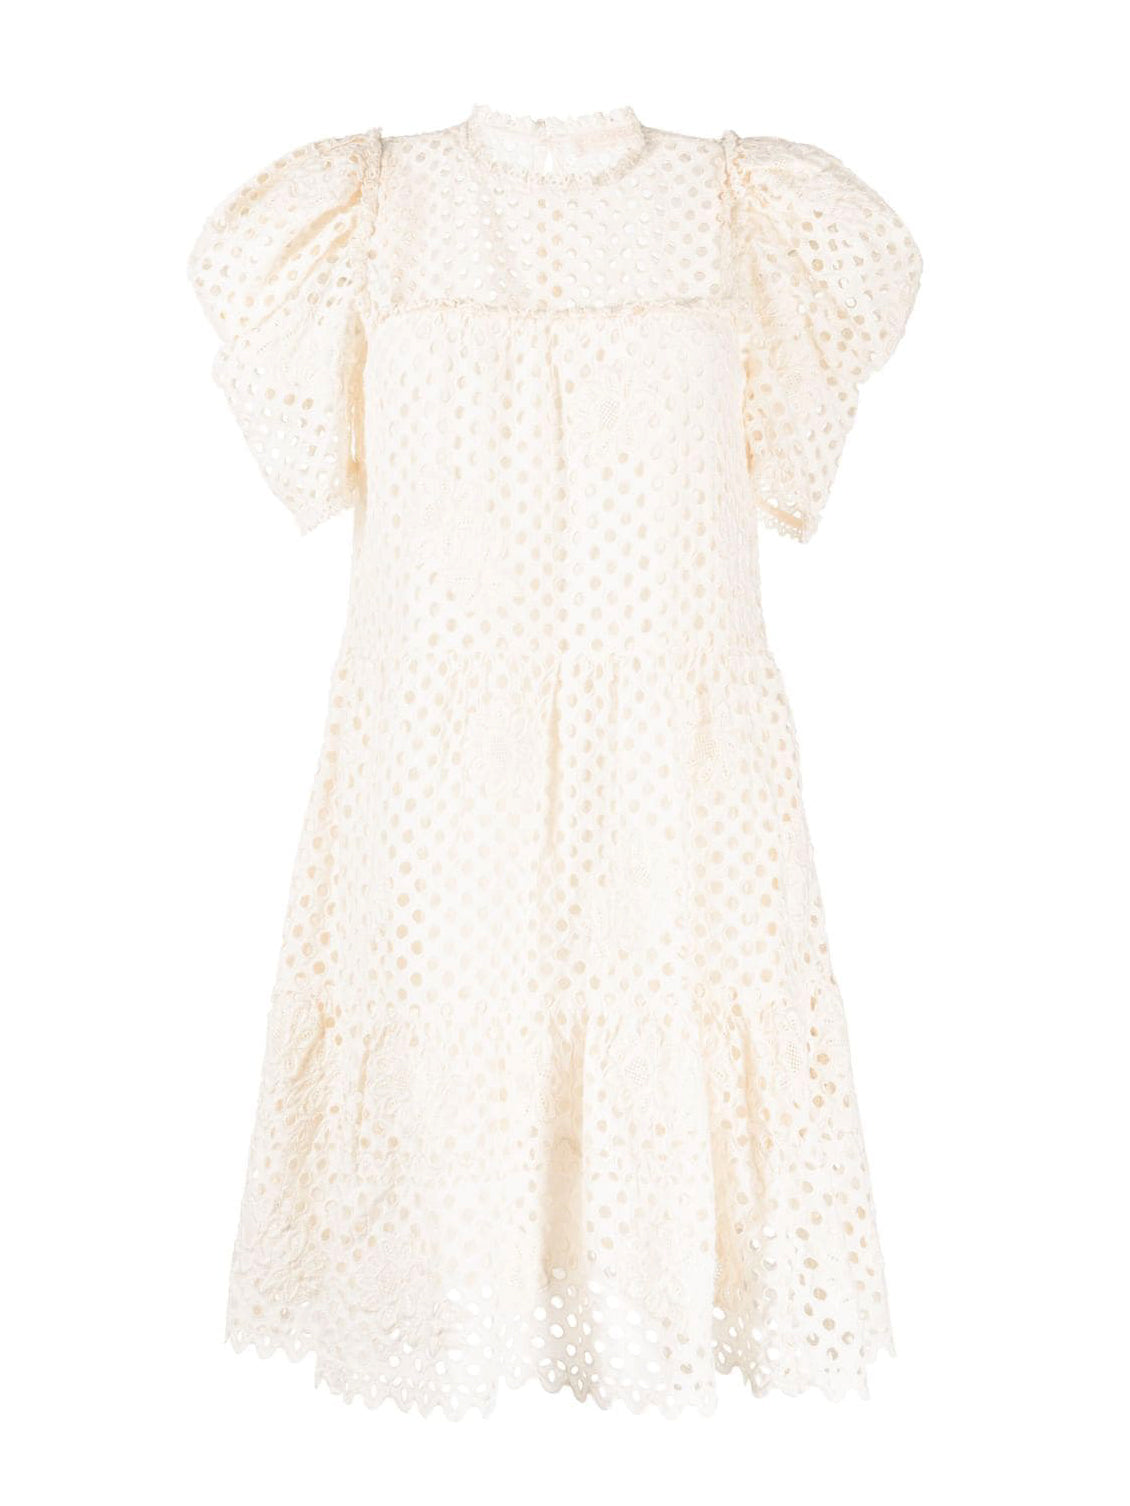 Ulla Johnson:Simone floral-appliqué dress in ivory. Sold by My o My Helsinki. 